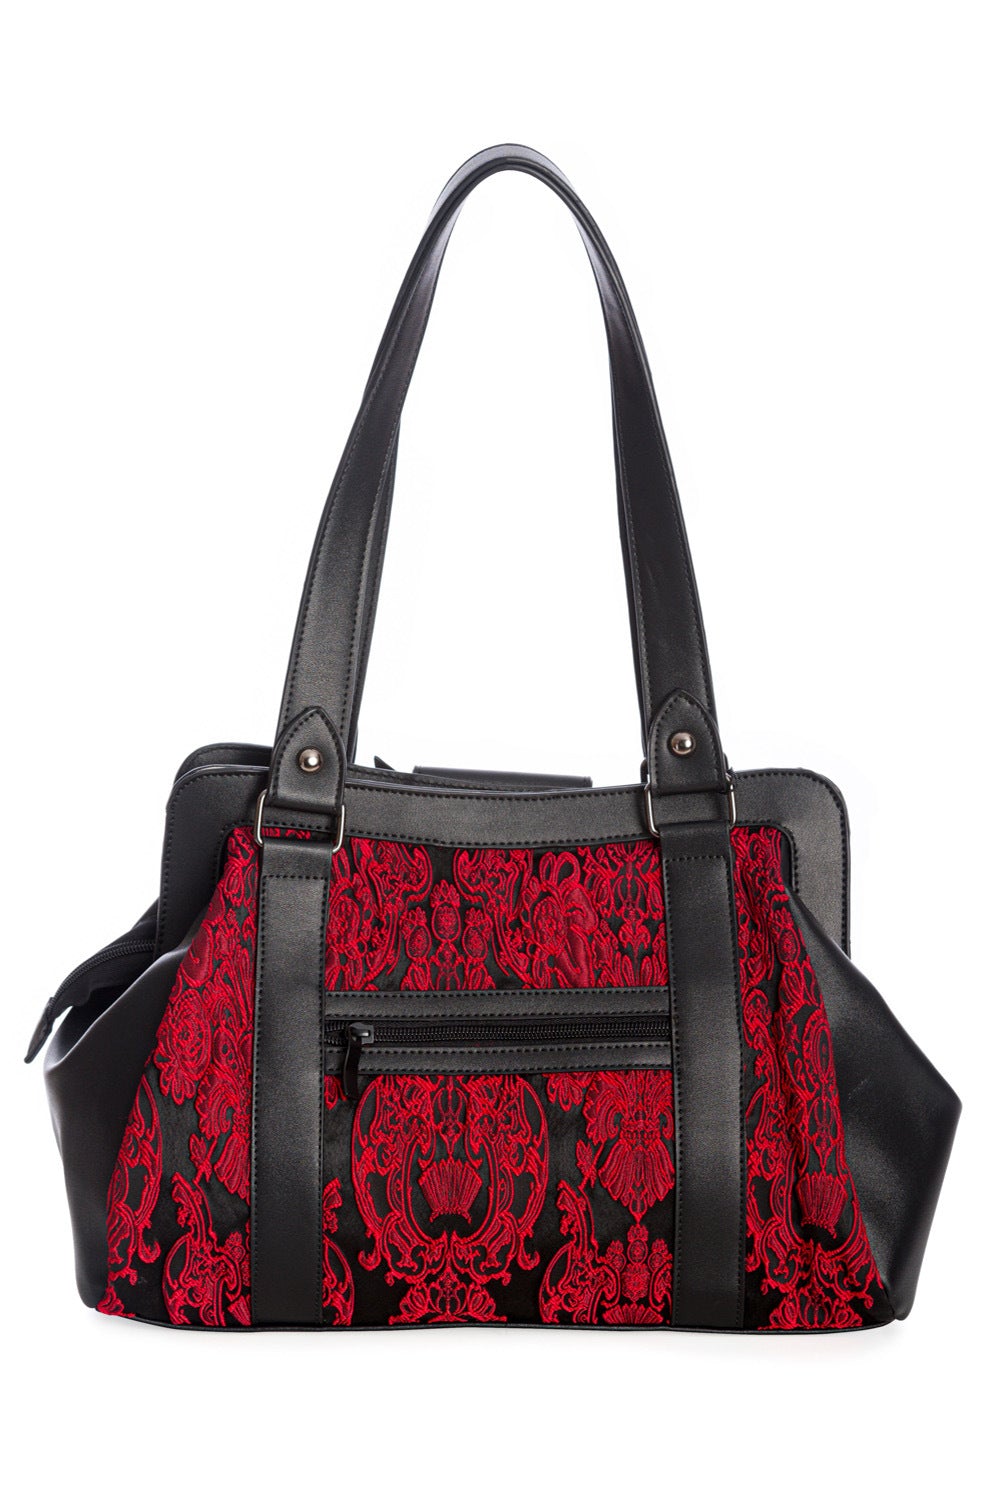 Black and red shoulder bag with skull studs, lace features and black matte bow. 